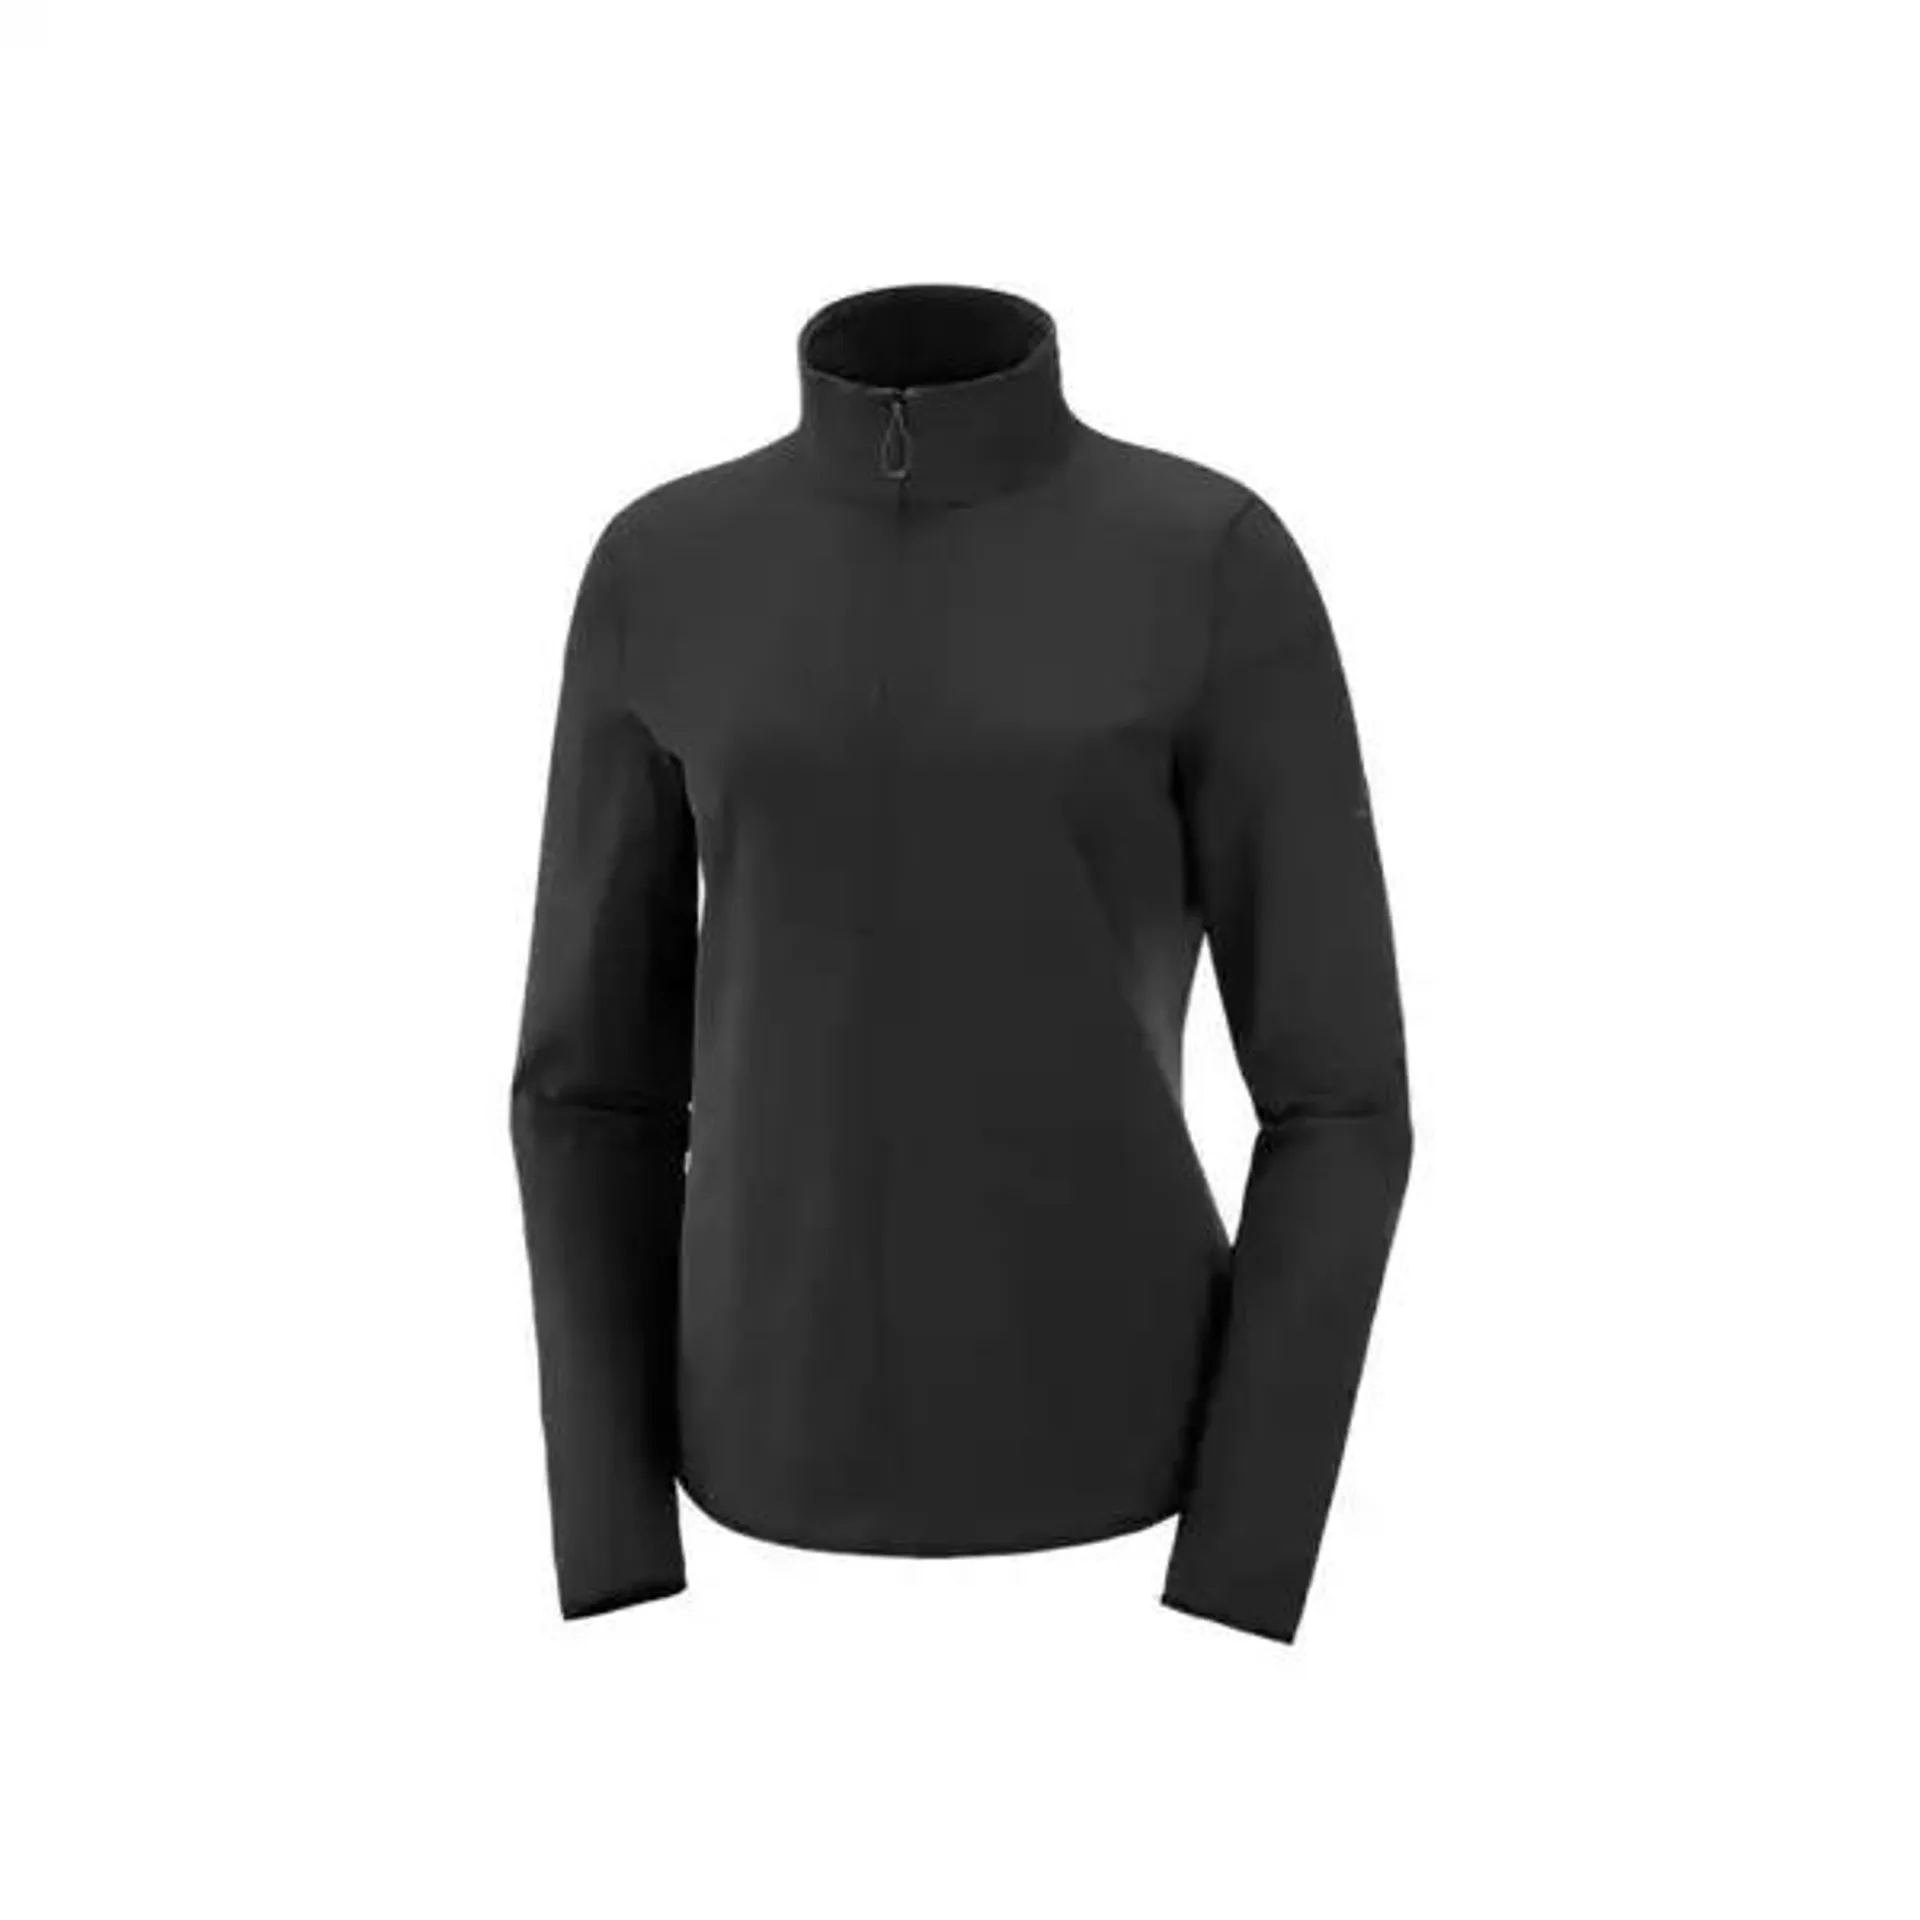 Outrack half zip mid